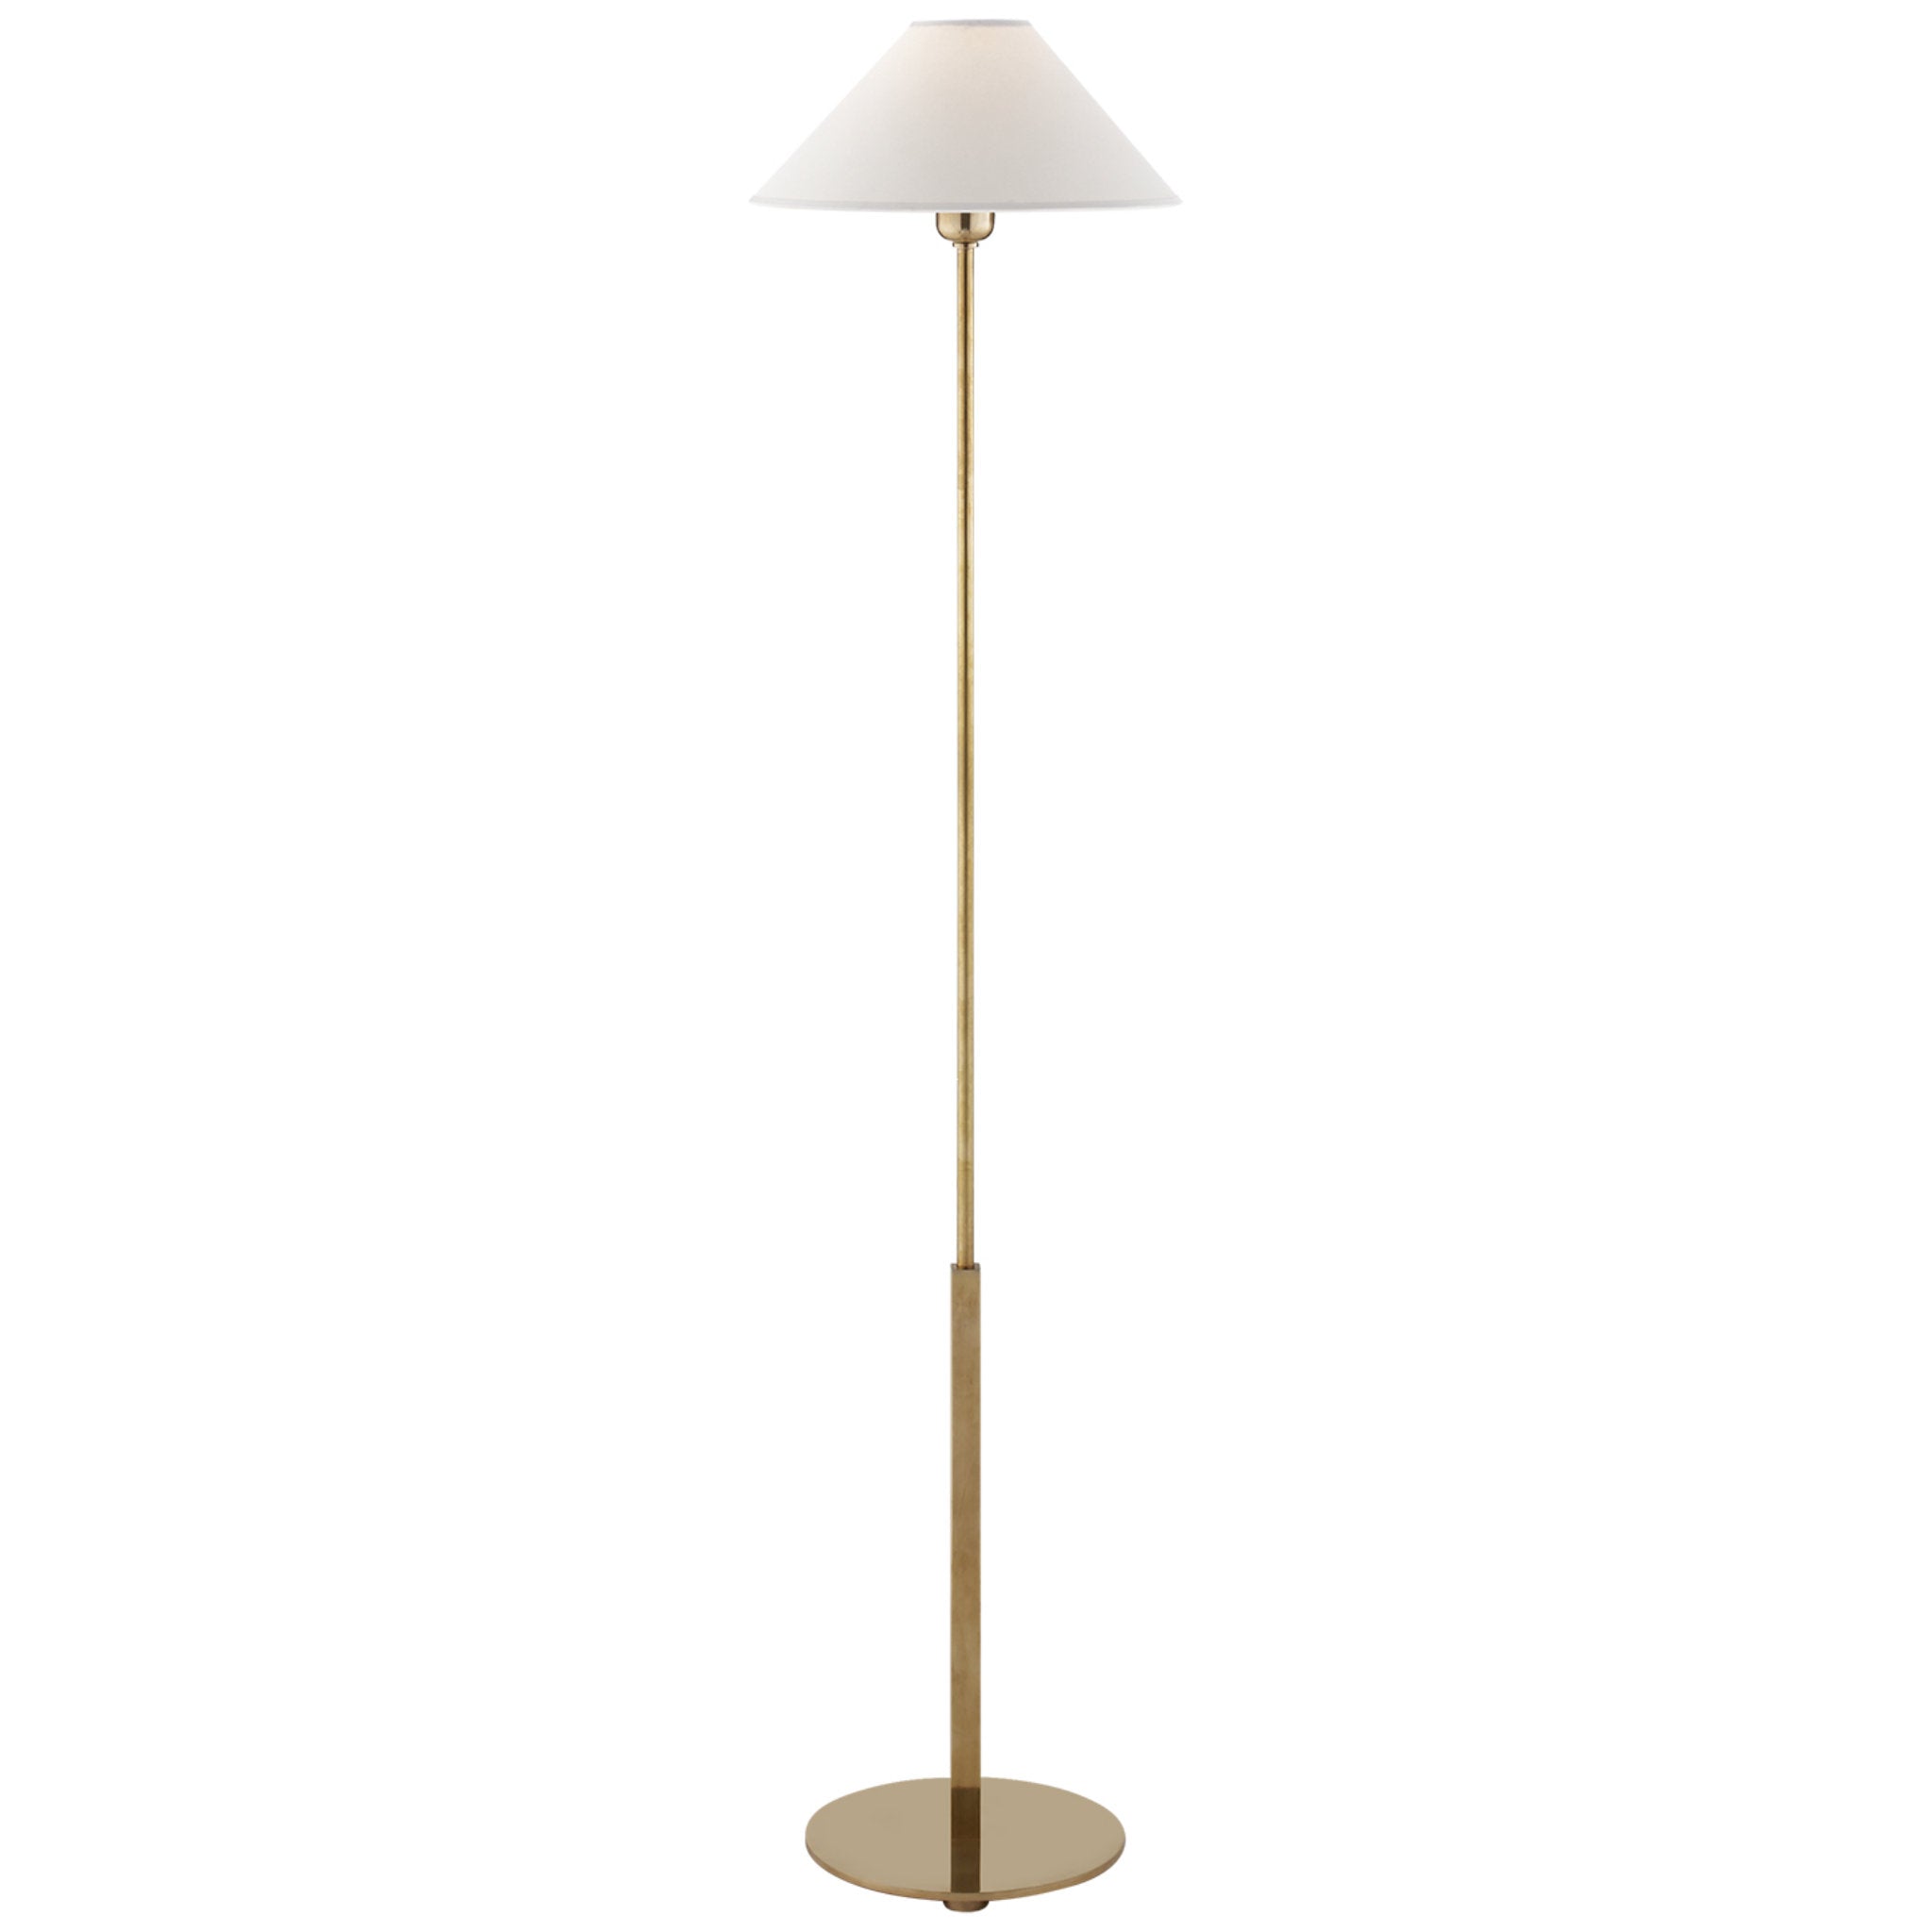 J. Randall Powers Hackney Floor Lamp in Hand-Rubbed Antique Brass with Natural Paper Shade